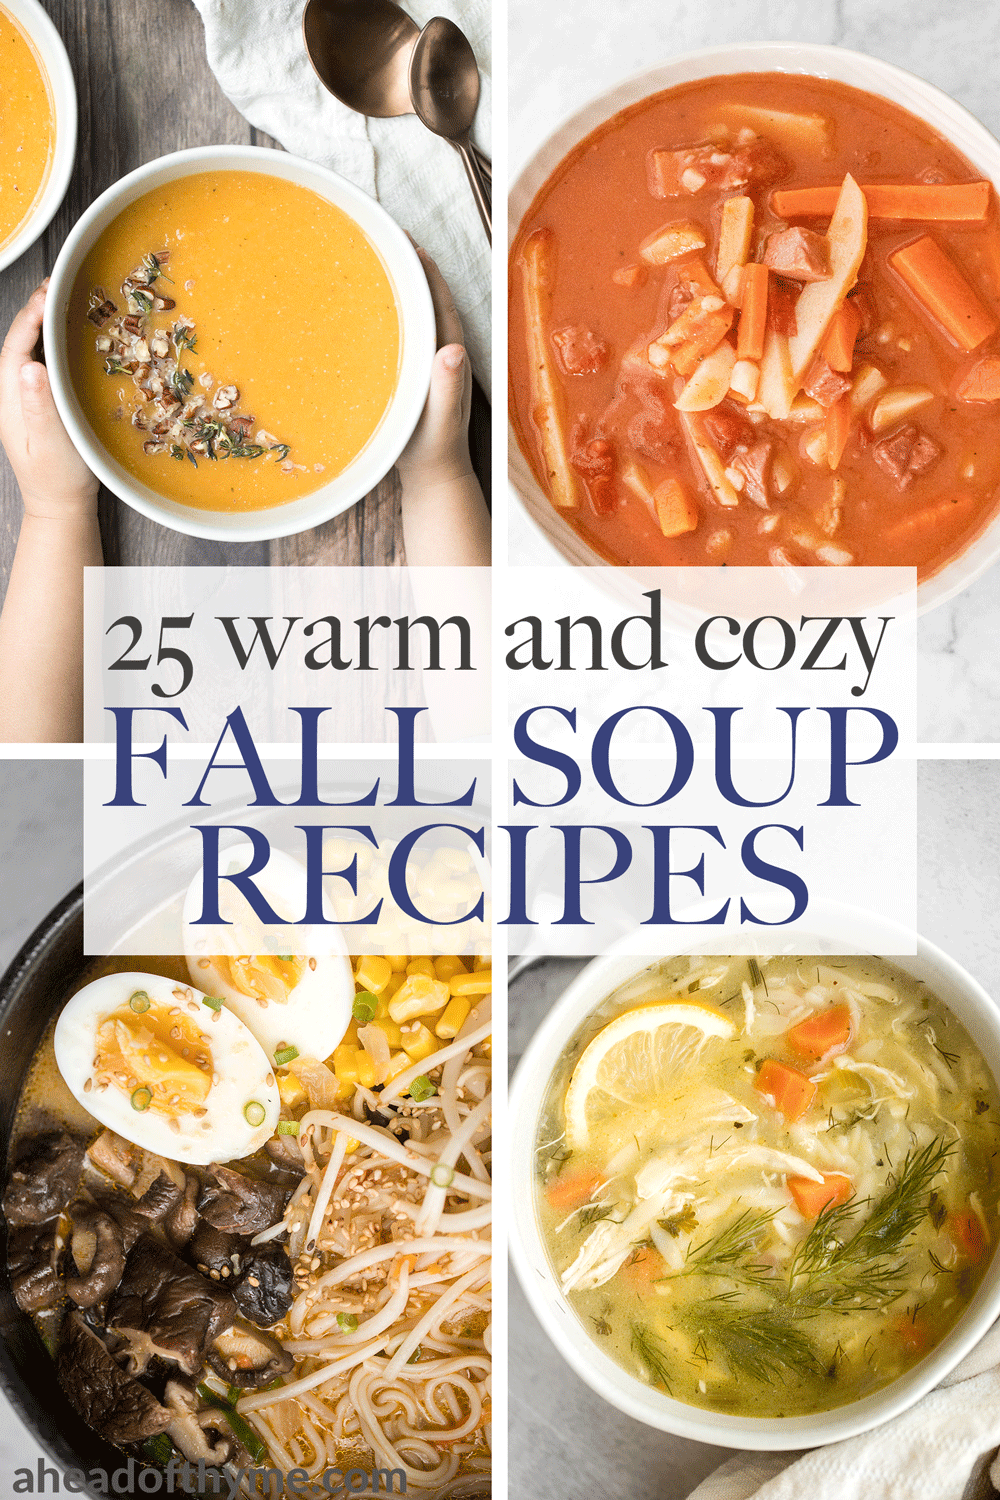 25 Warm and Cozy Fall Soup Recipes